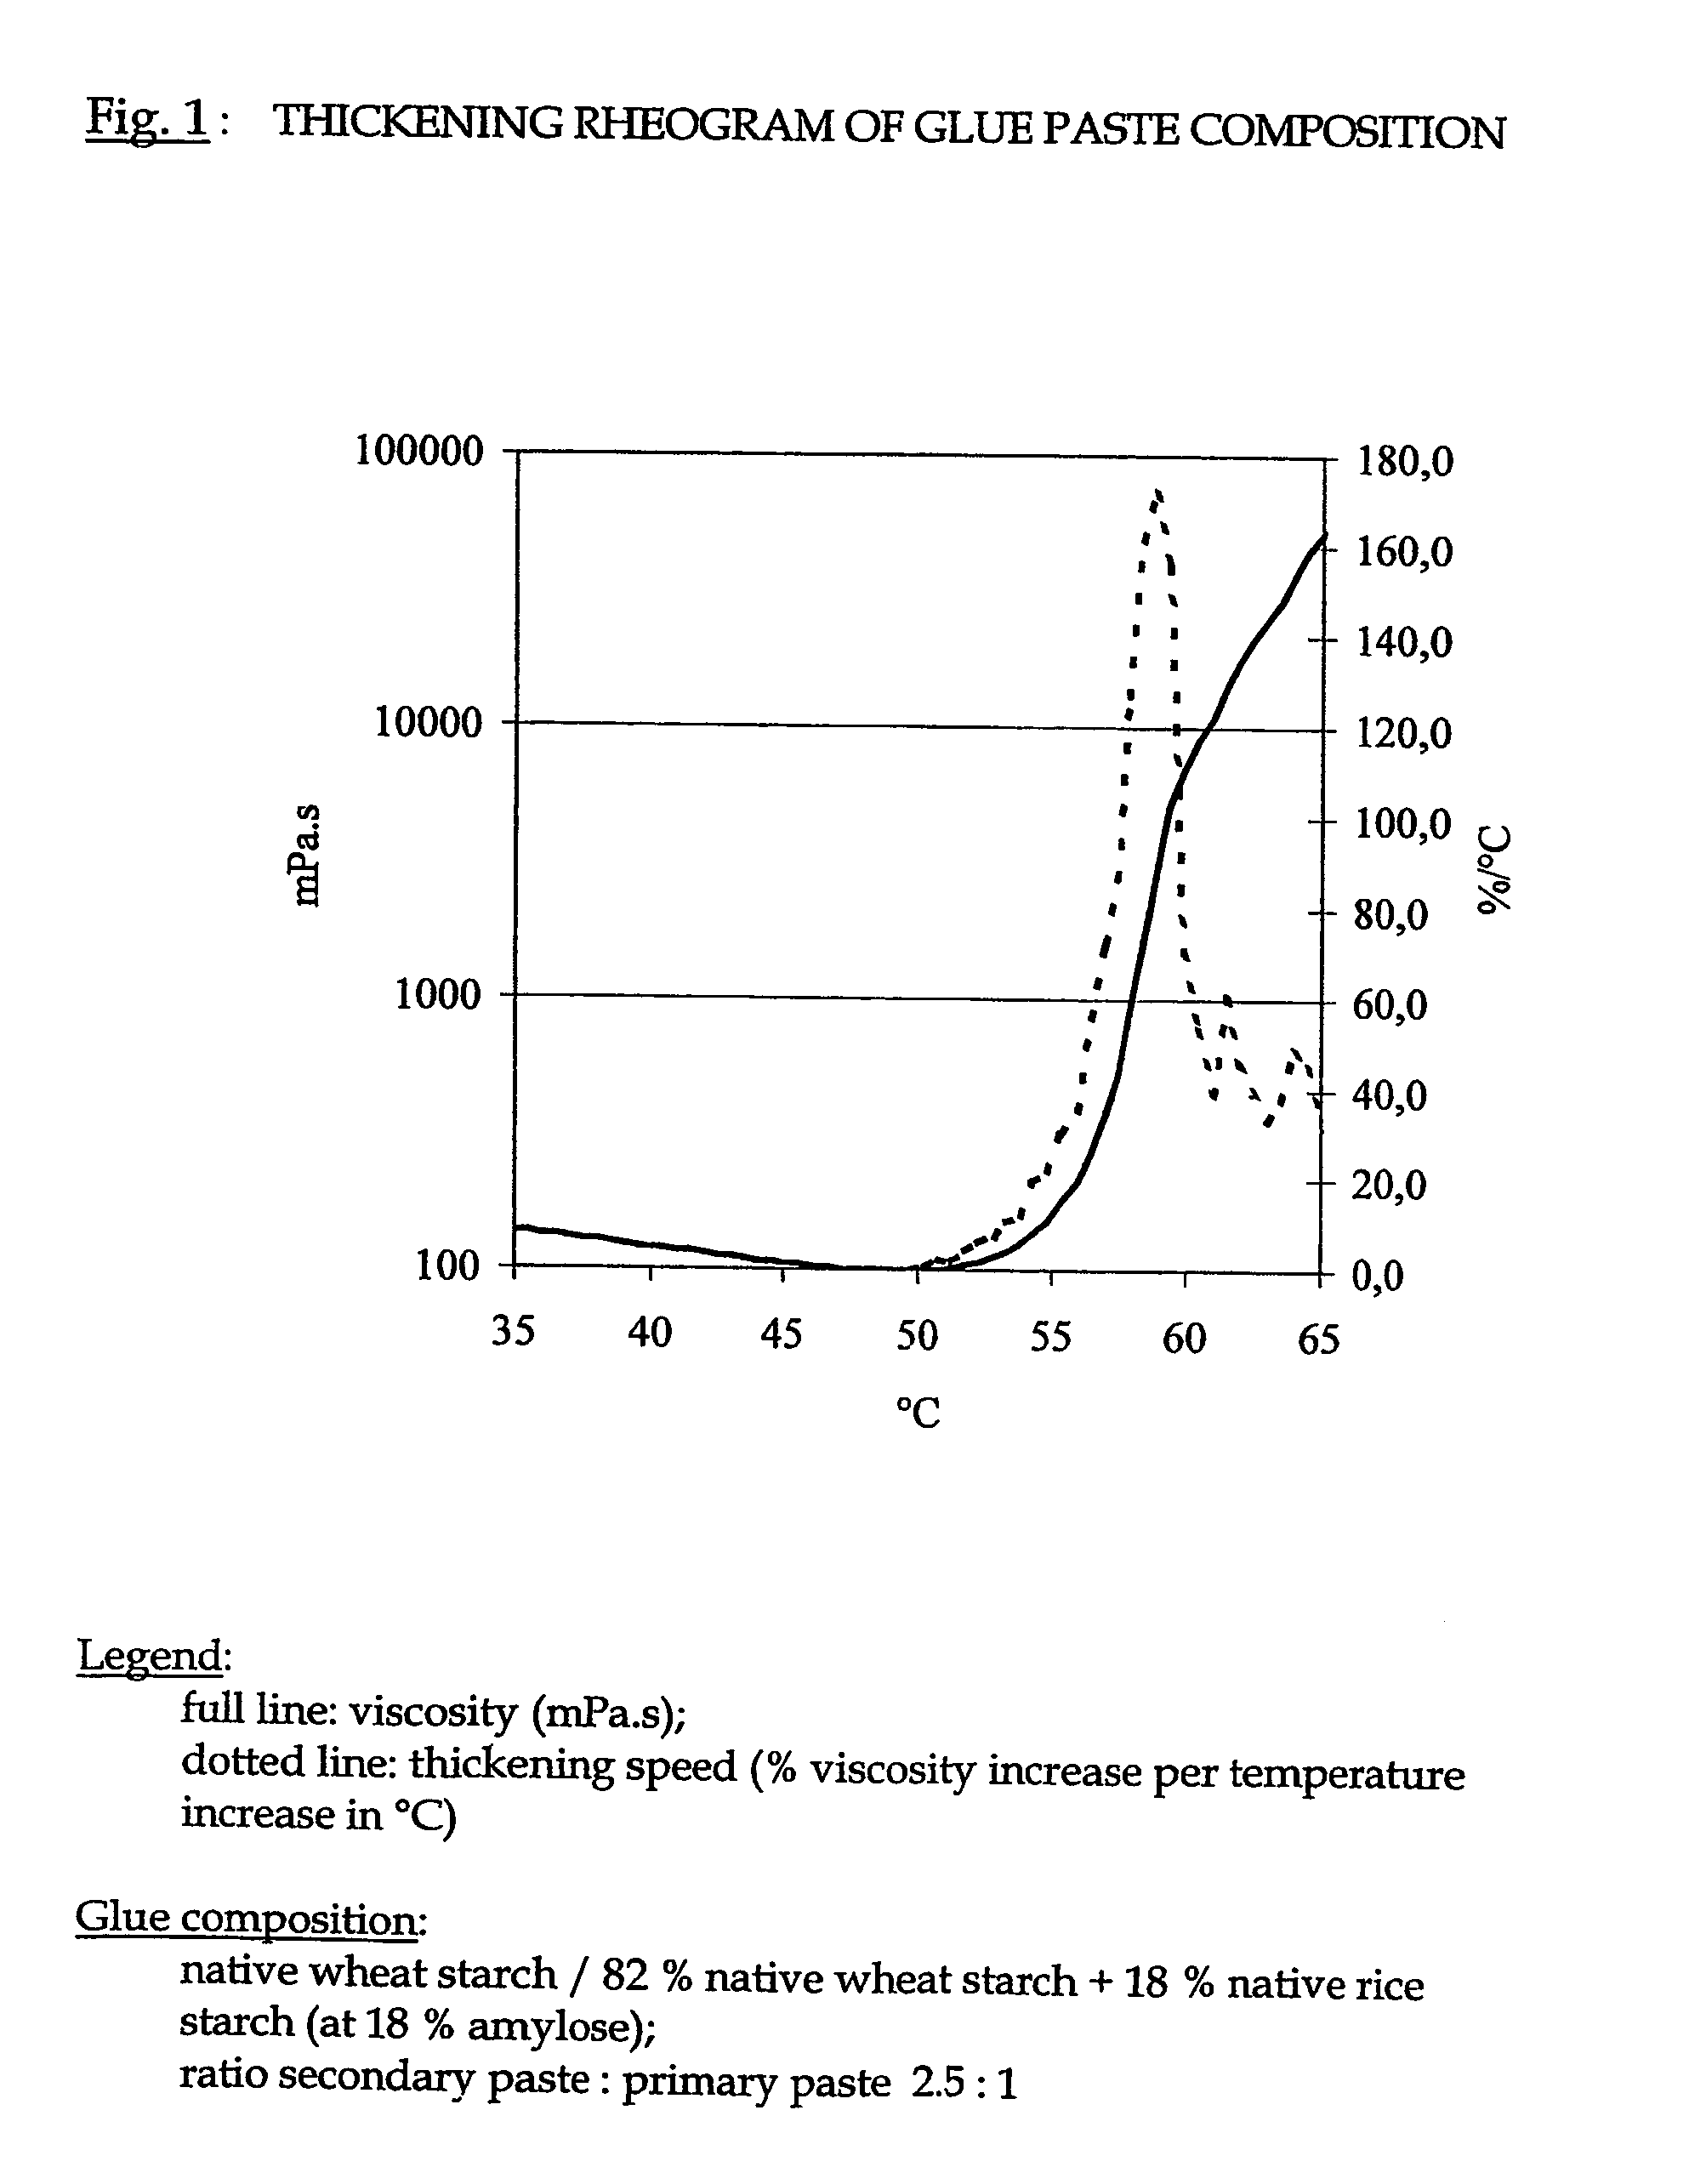 Starch-based glue paste compositions